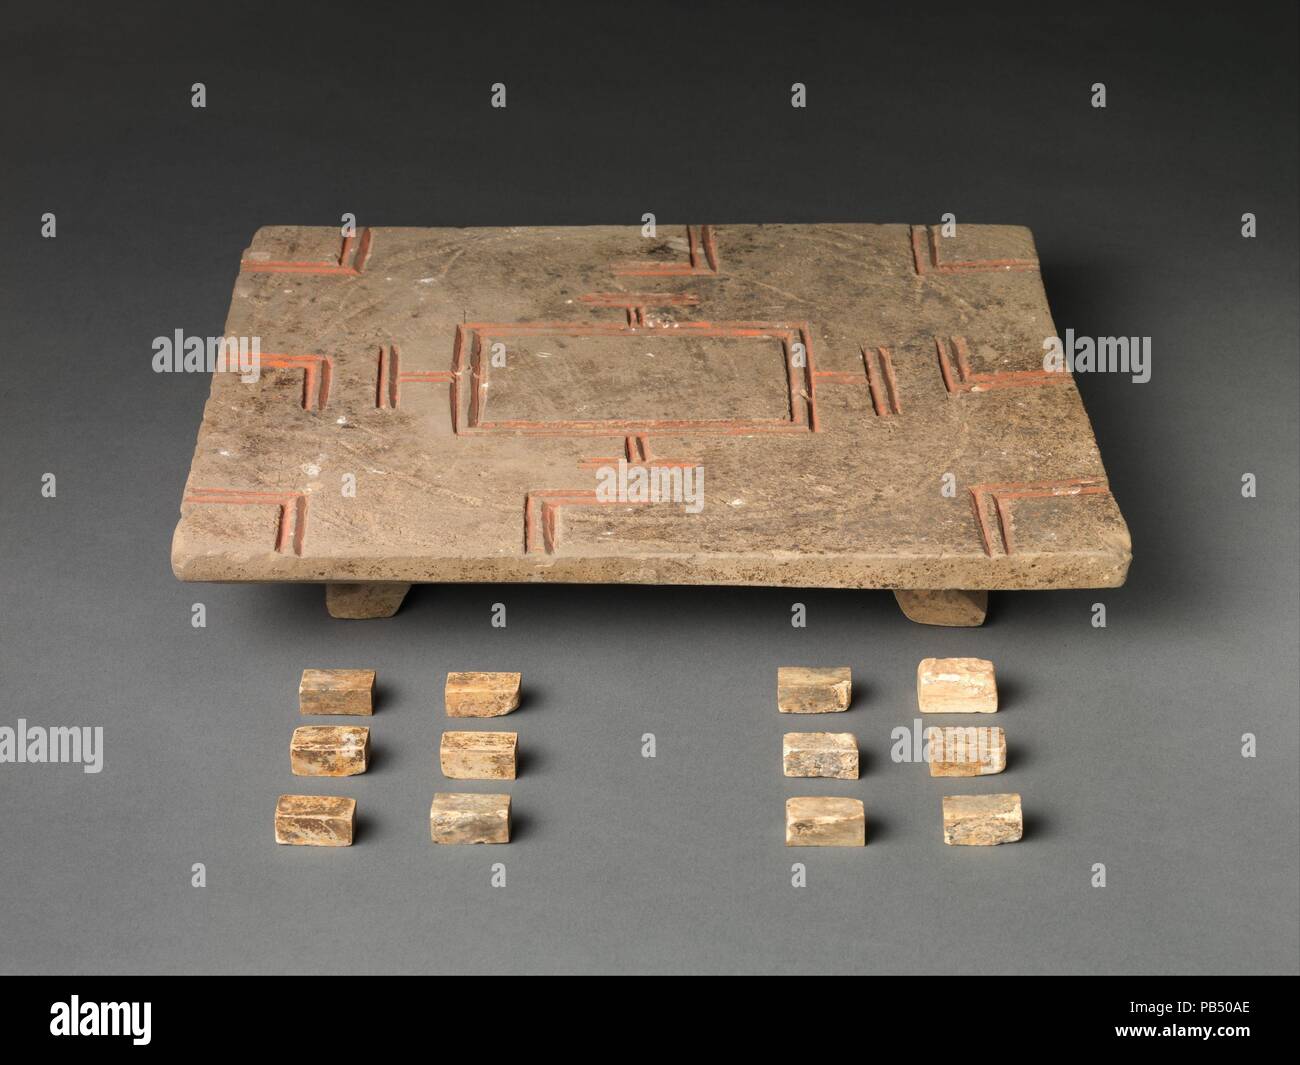 Liubo Board and Pieces. Culture: China. Dimensions: L. 14 1/4 in. (36.2 cm); W. 12 3/8 in. (31.4 cm); H. 2 in. (5.1 cm). Date: 1st century B.C.-1st century A.D..  A popular game in the Han dynasty, liubo involves two players who gamble using dice, counters, gaming pieces, and a marked board. These figures, captured in a dramatic moment, embody the wish for the continuation of life in the tomb. Museum: Metropolitan Museum of Art, New York, USA. Stock Photo